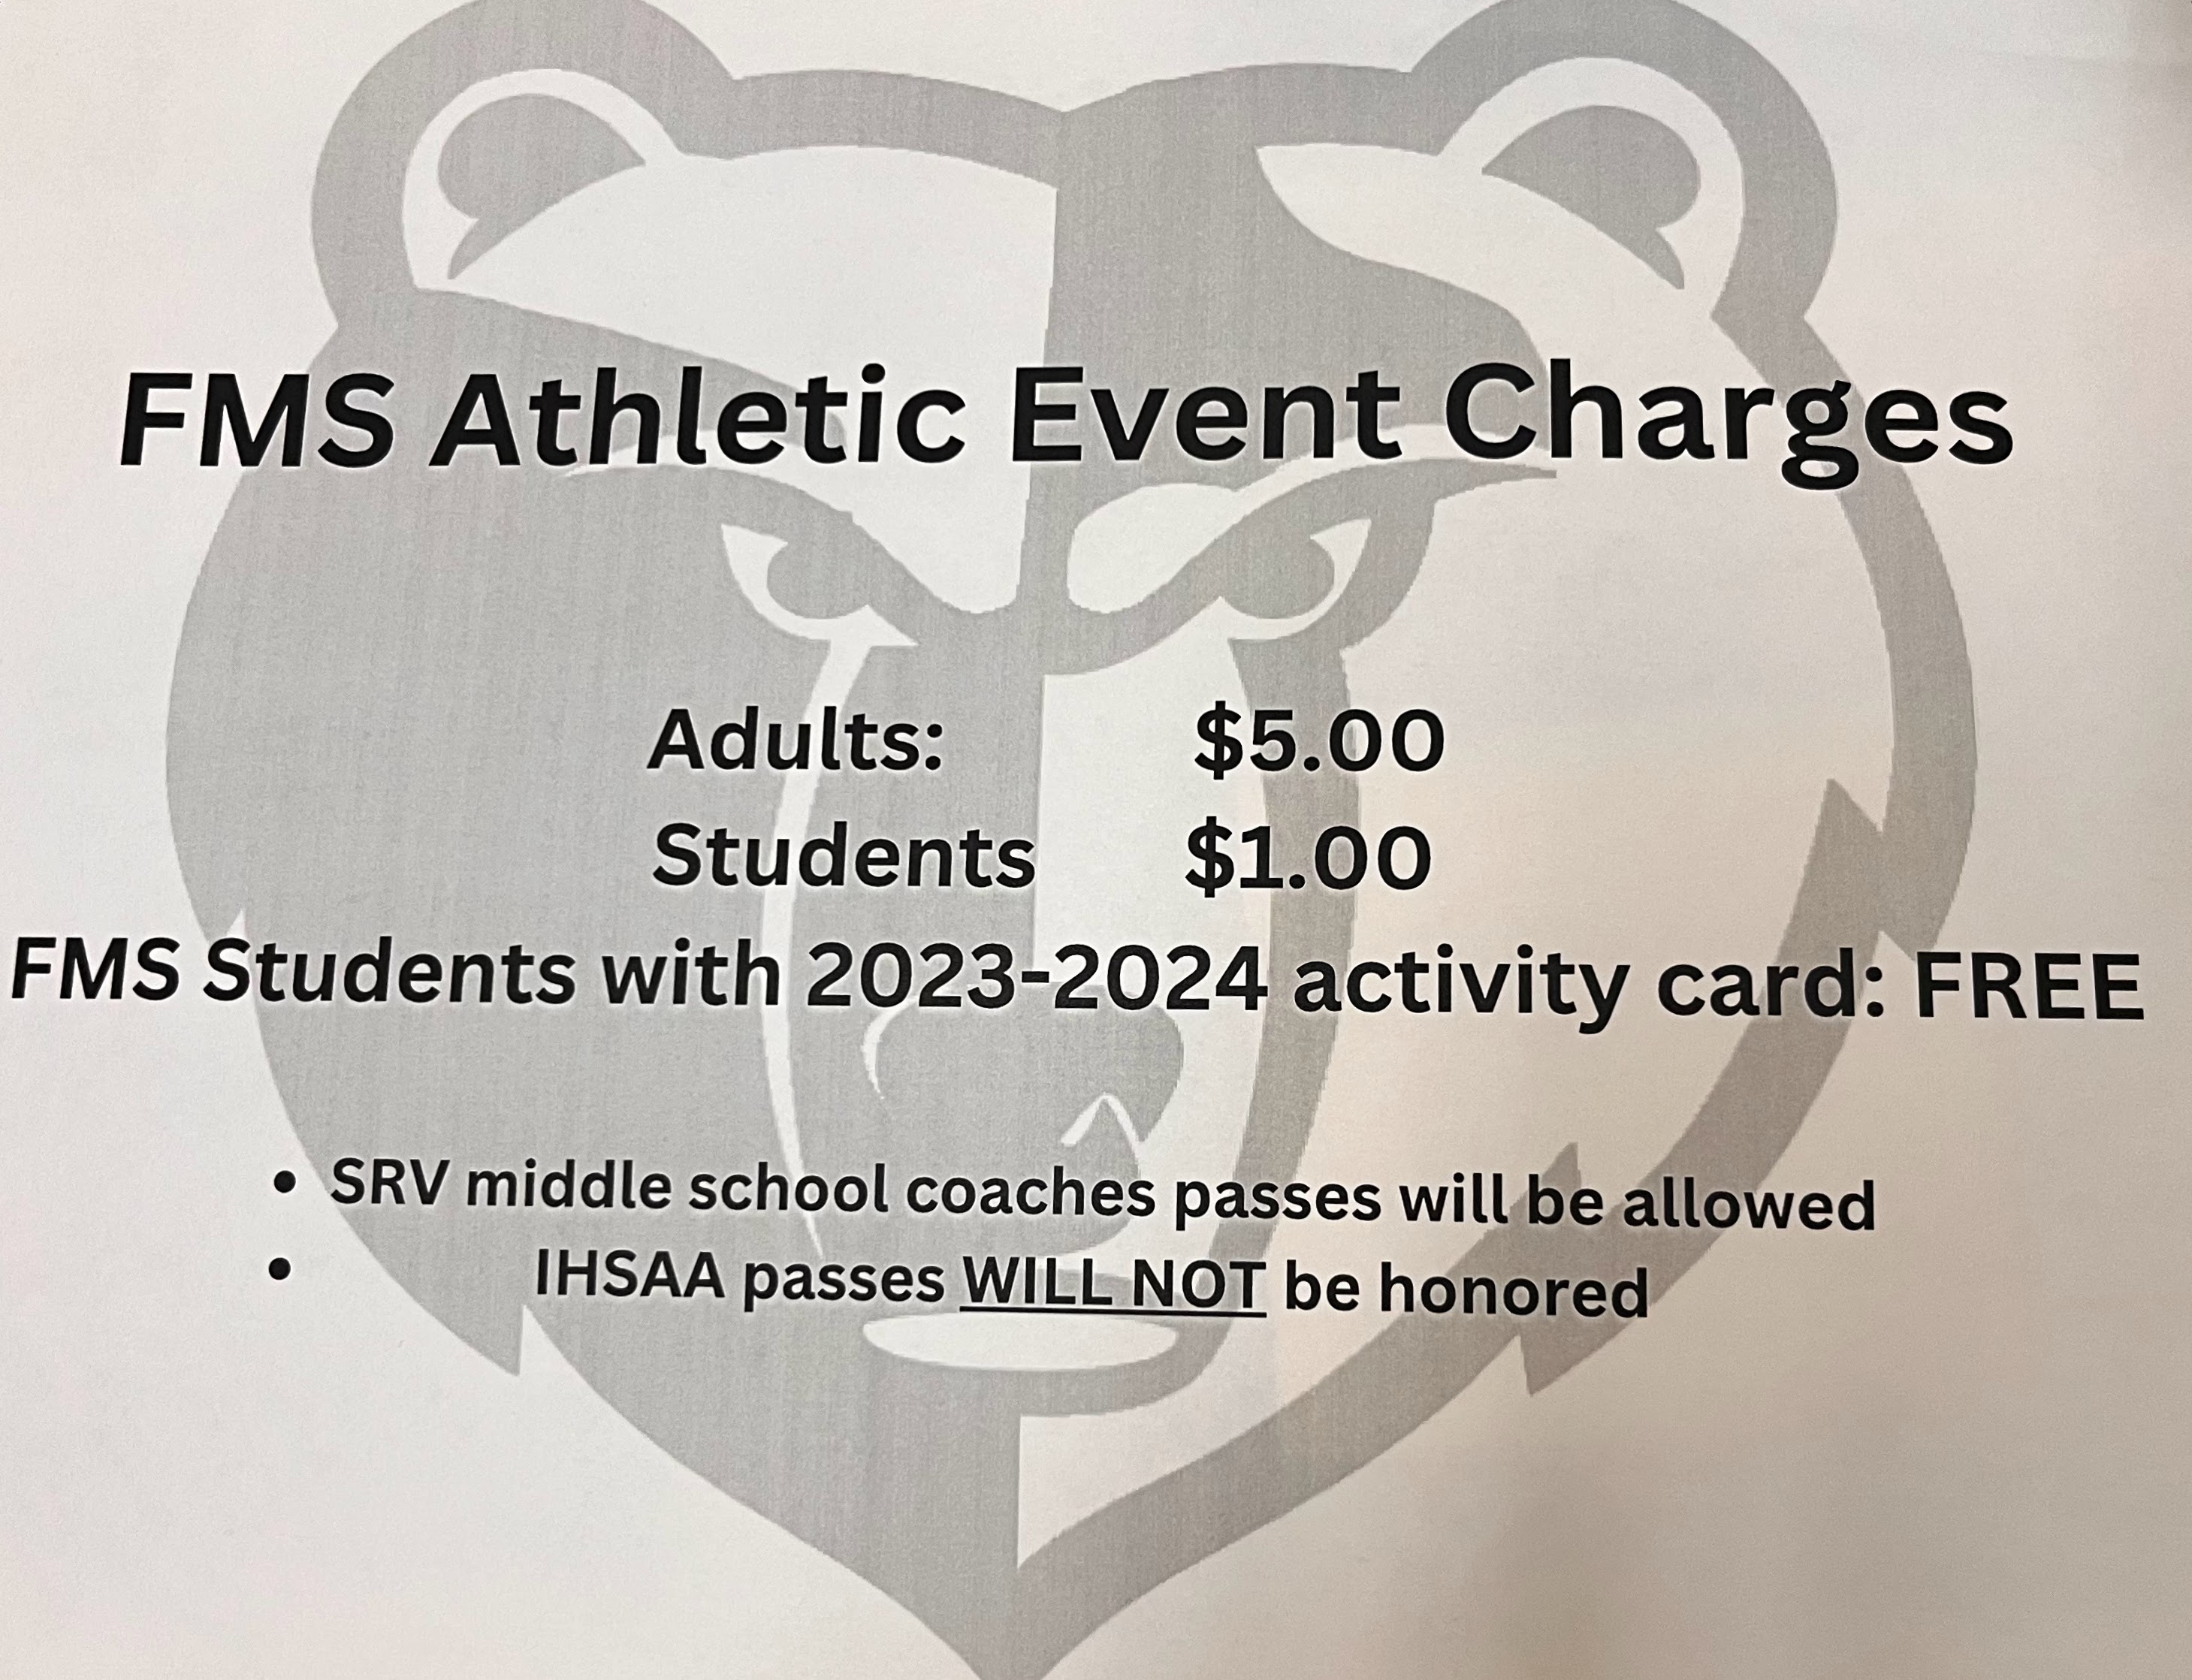 FMS Athletic Event Charges; adults $5, students $1, students wtih activity card free